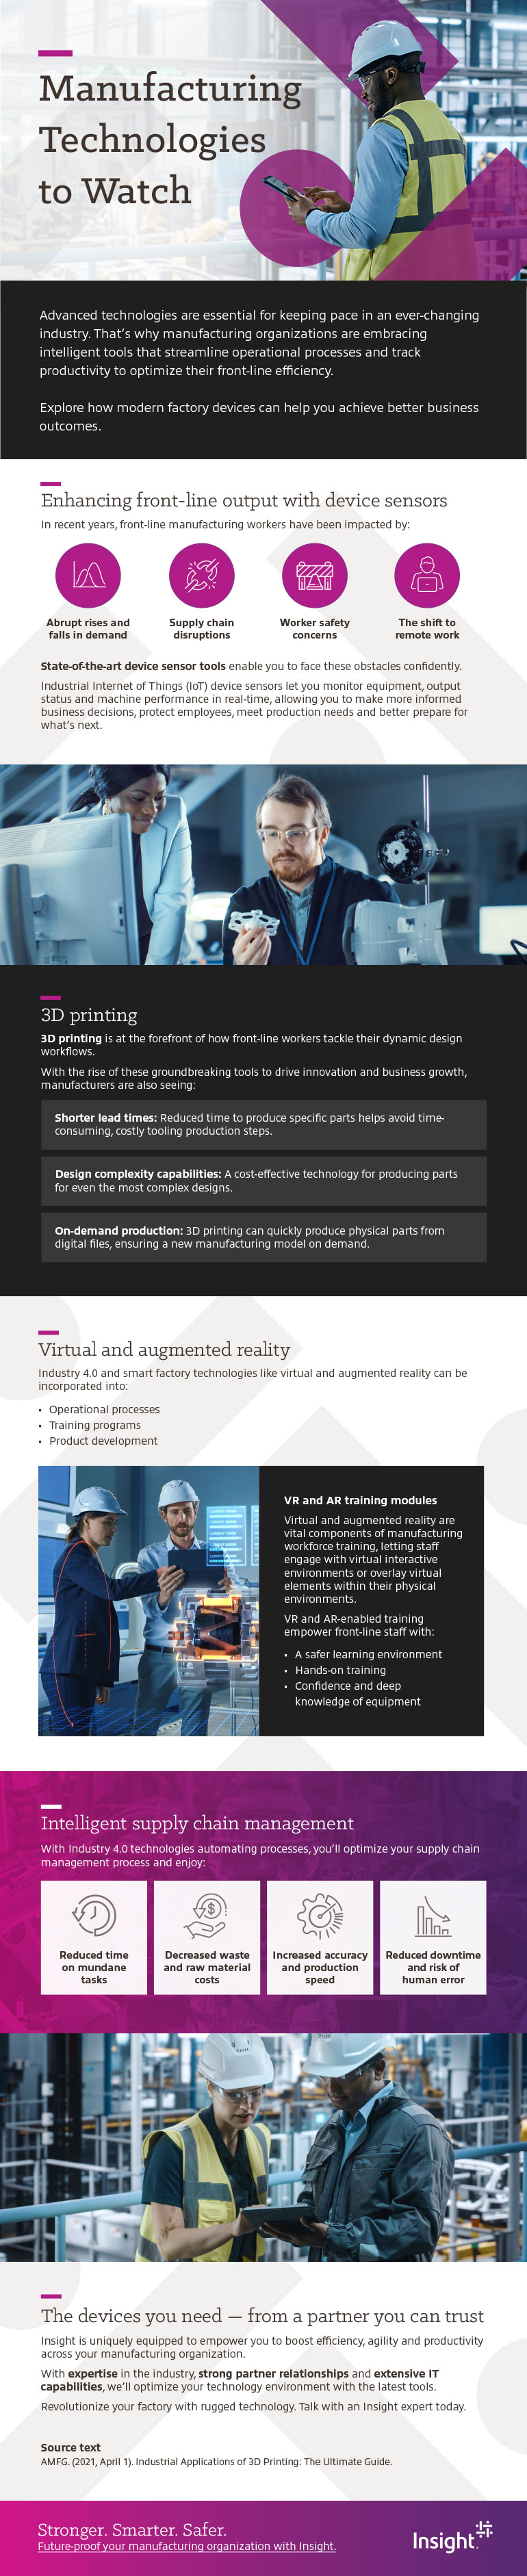 Manufacturing Technologies to Watch infographic